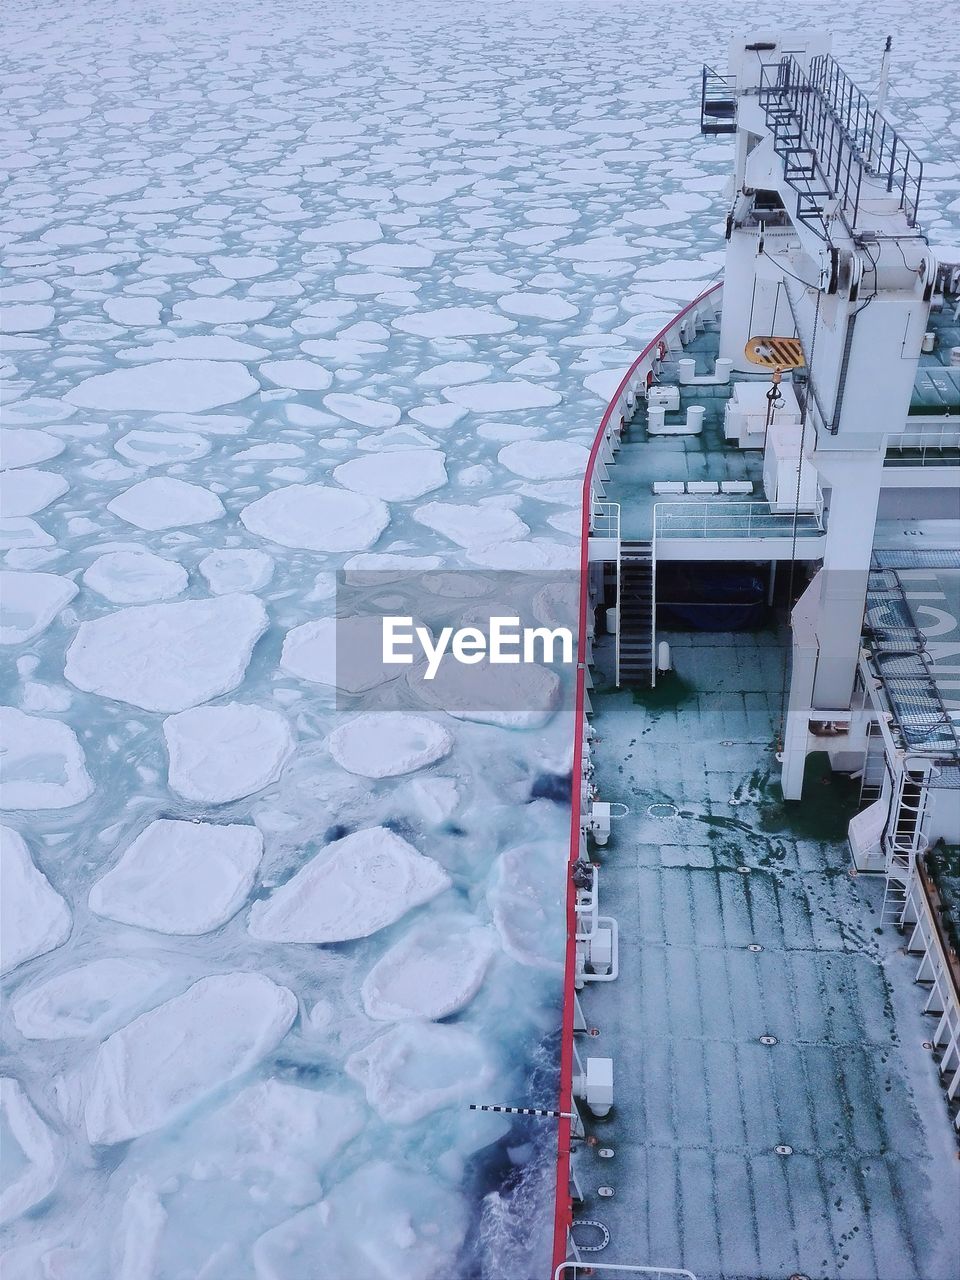 Ice breaker ship surrounded by pancake sea ice in the winter southern ocean close to antarctica